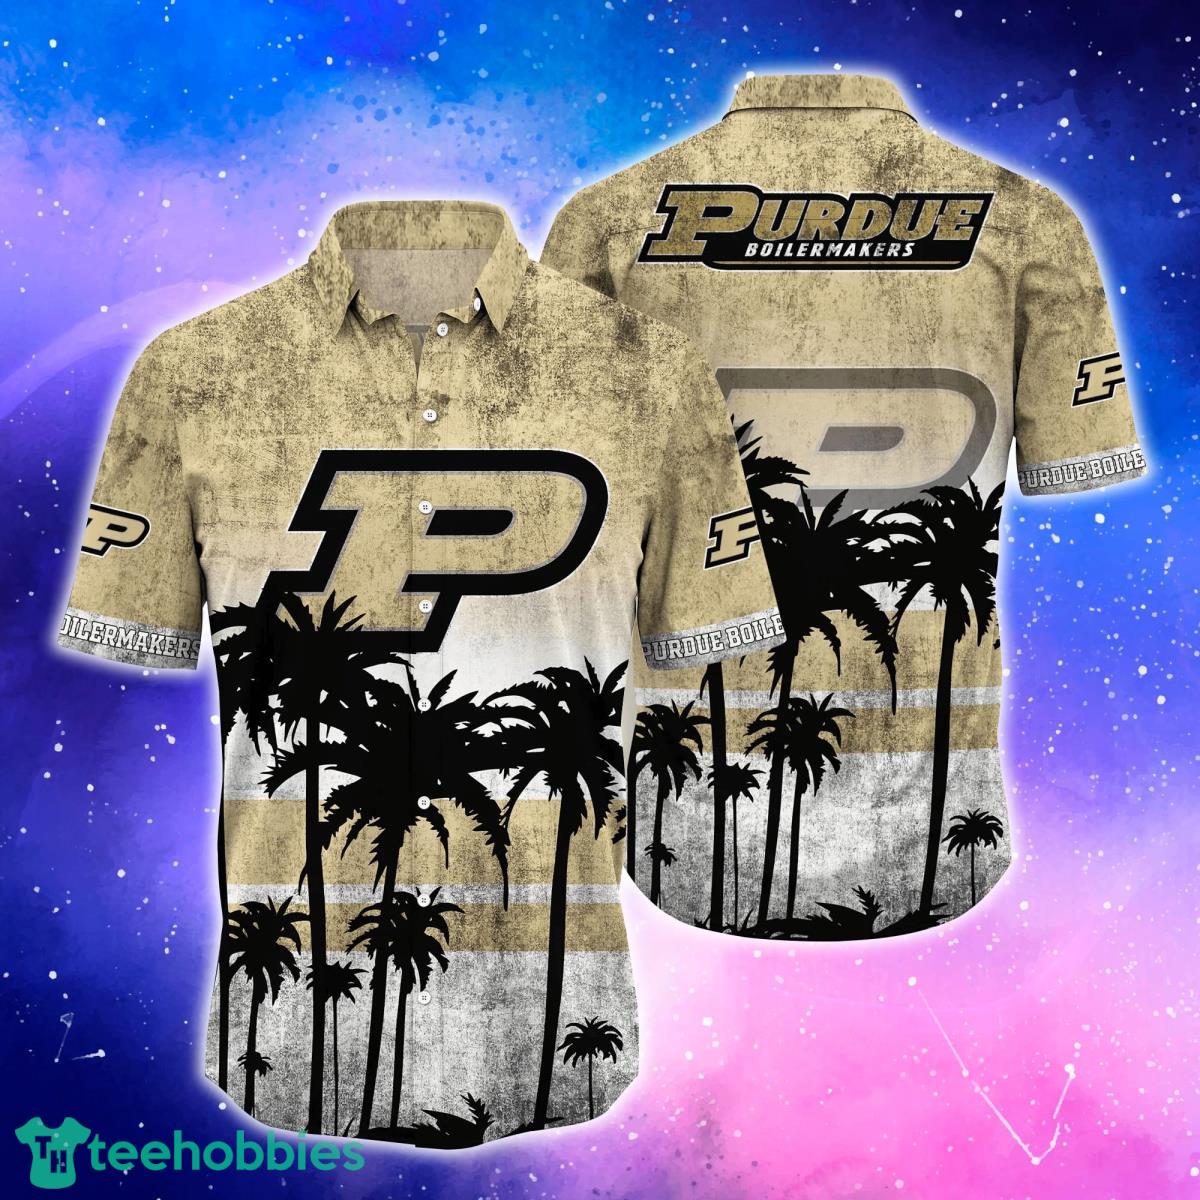 Purdue Boilermakers Trending Hawaiian Shirt And Shorts For Fans Product Photo 1